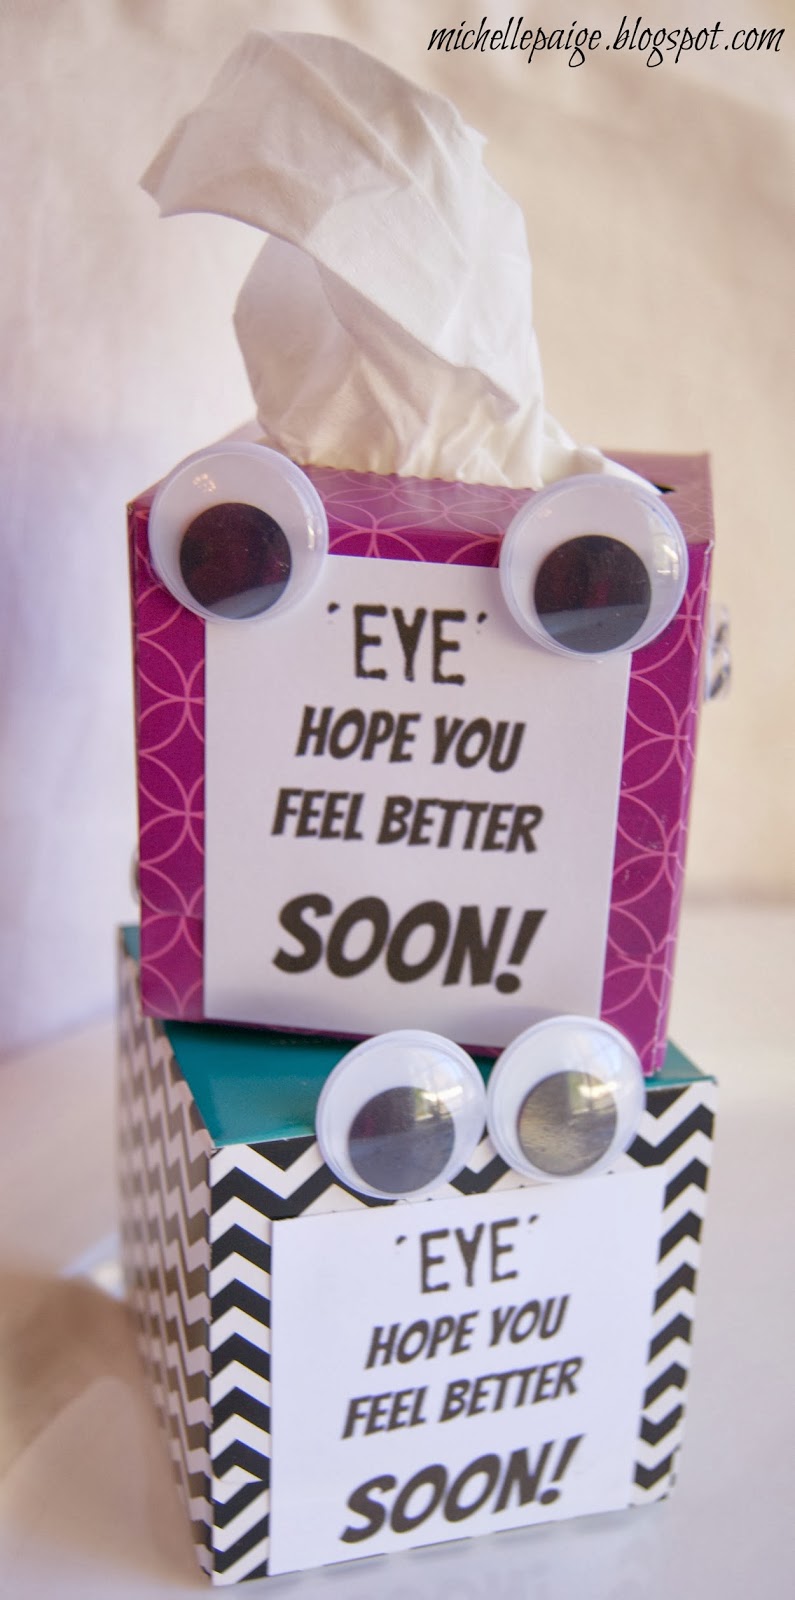 michelle paige blogs Get Well Soon Tissue Box Gift